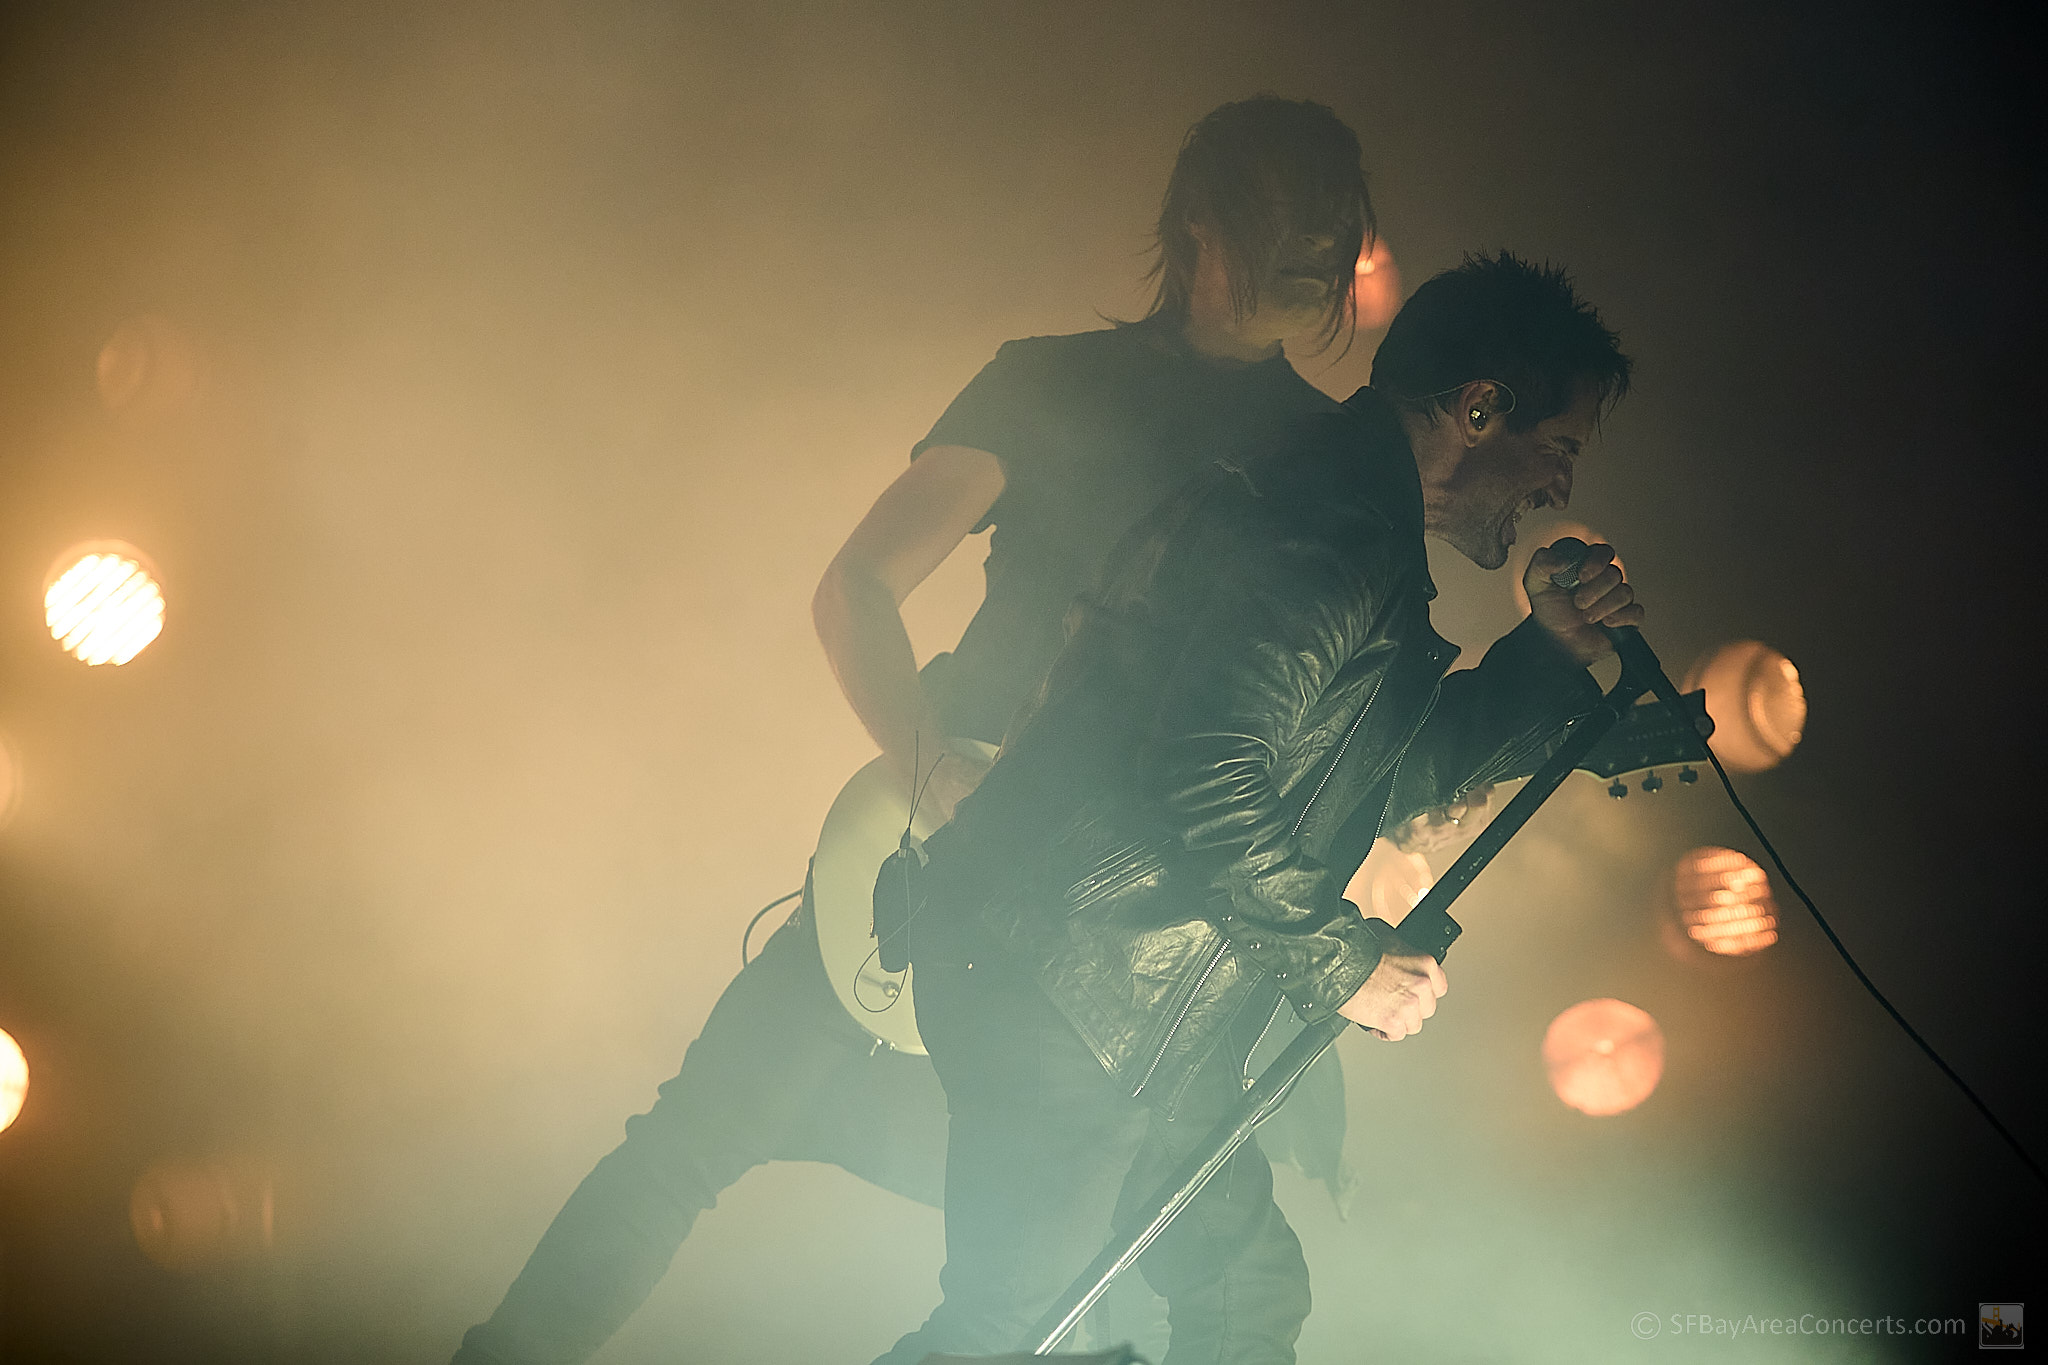 Review - Nine Inch Nails, Ministry & Nitzer Ebb @ Blossom Music Center, OH  (9/24/22)